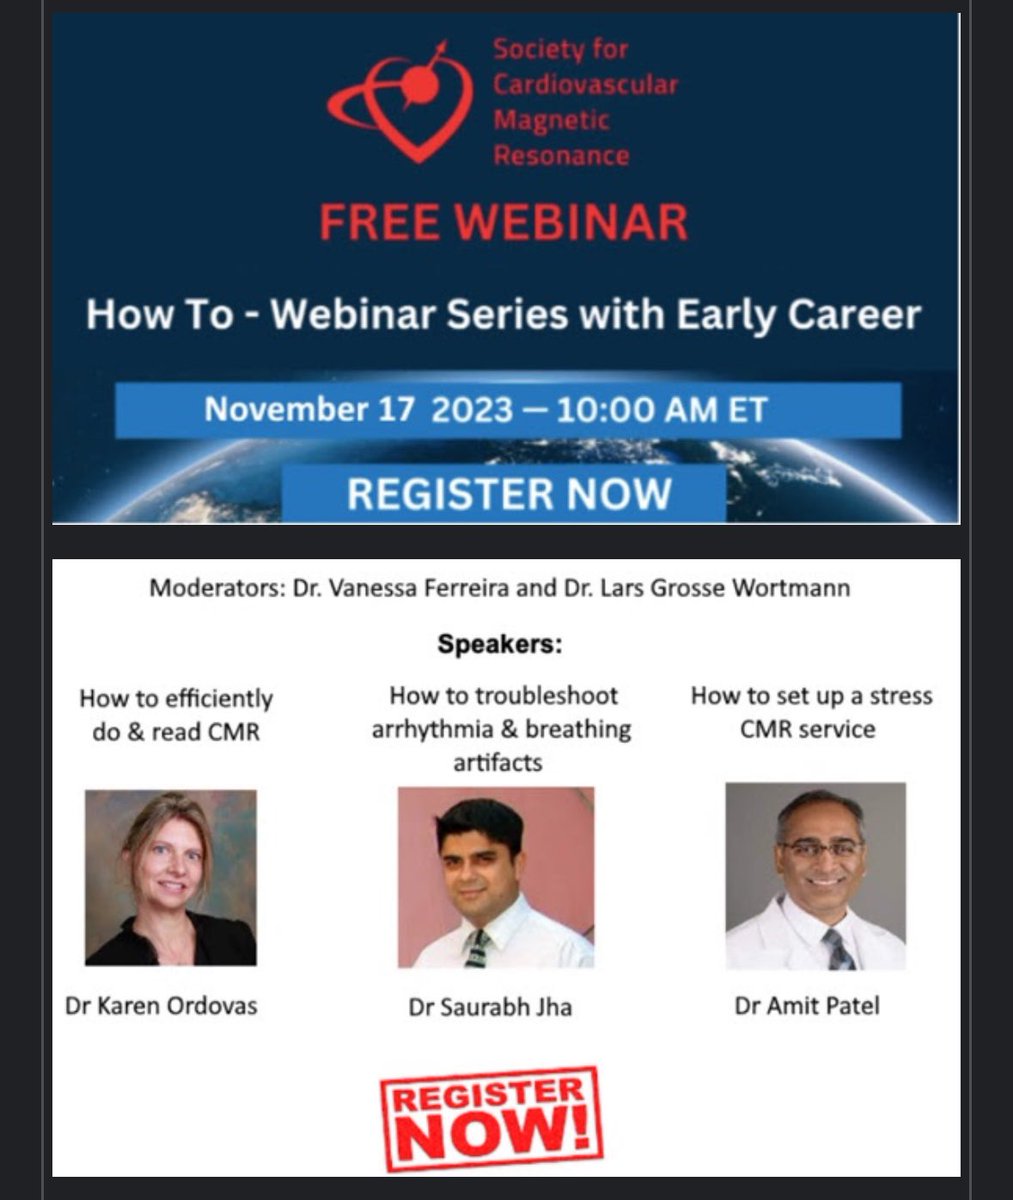 Join us for the 2nd webinar of the early career @SCMRorg webinar series on Nov 17! Learn from the masters- how to scan &read #whyCMR efficiently, setting up stress🧲service and dealing with artefacts by @karen_ordovas @AmitRPatelMD @RogueRad Register here- us02web.zoom.us/webinar/regist…